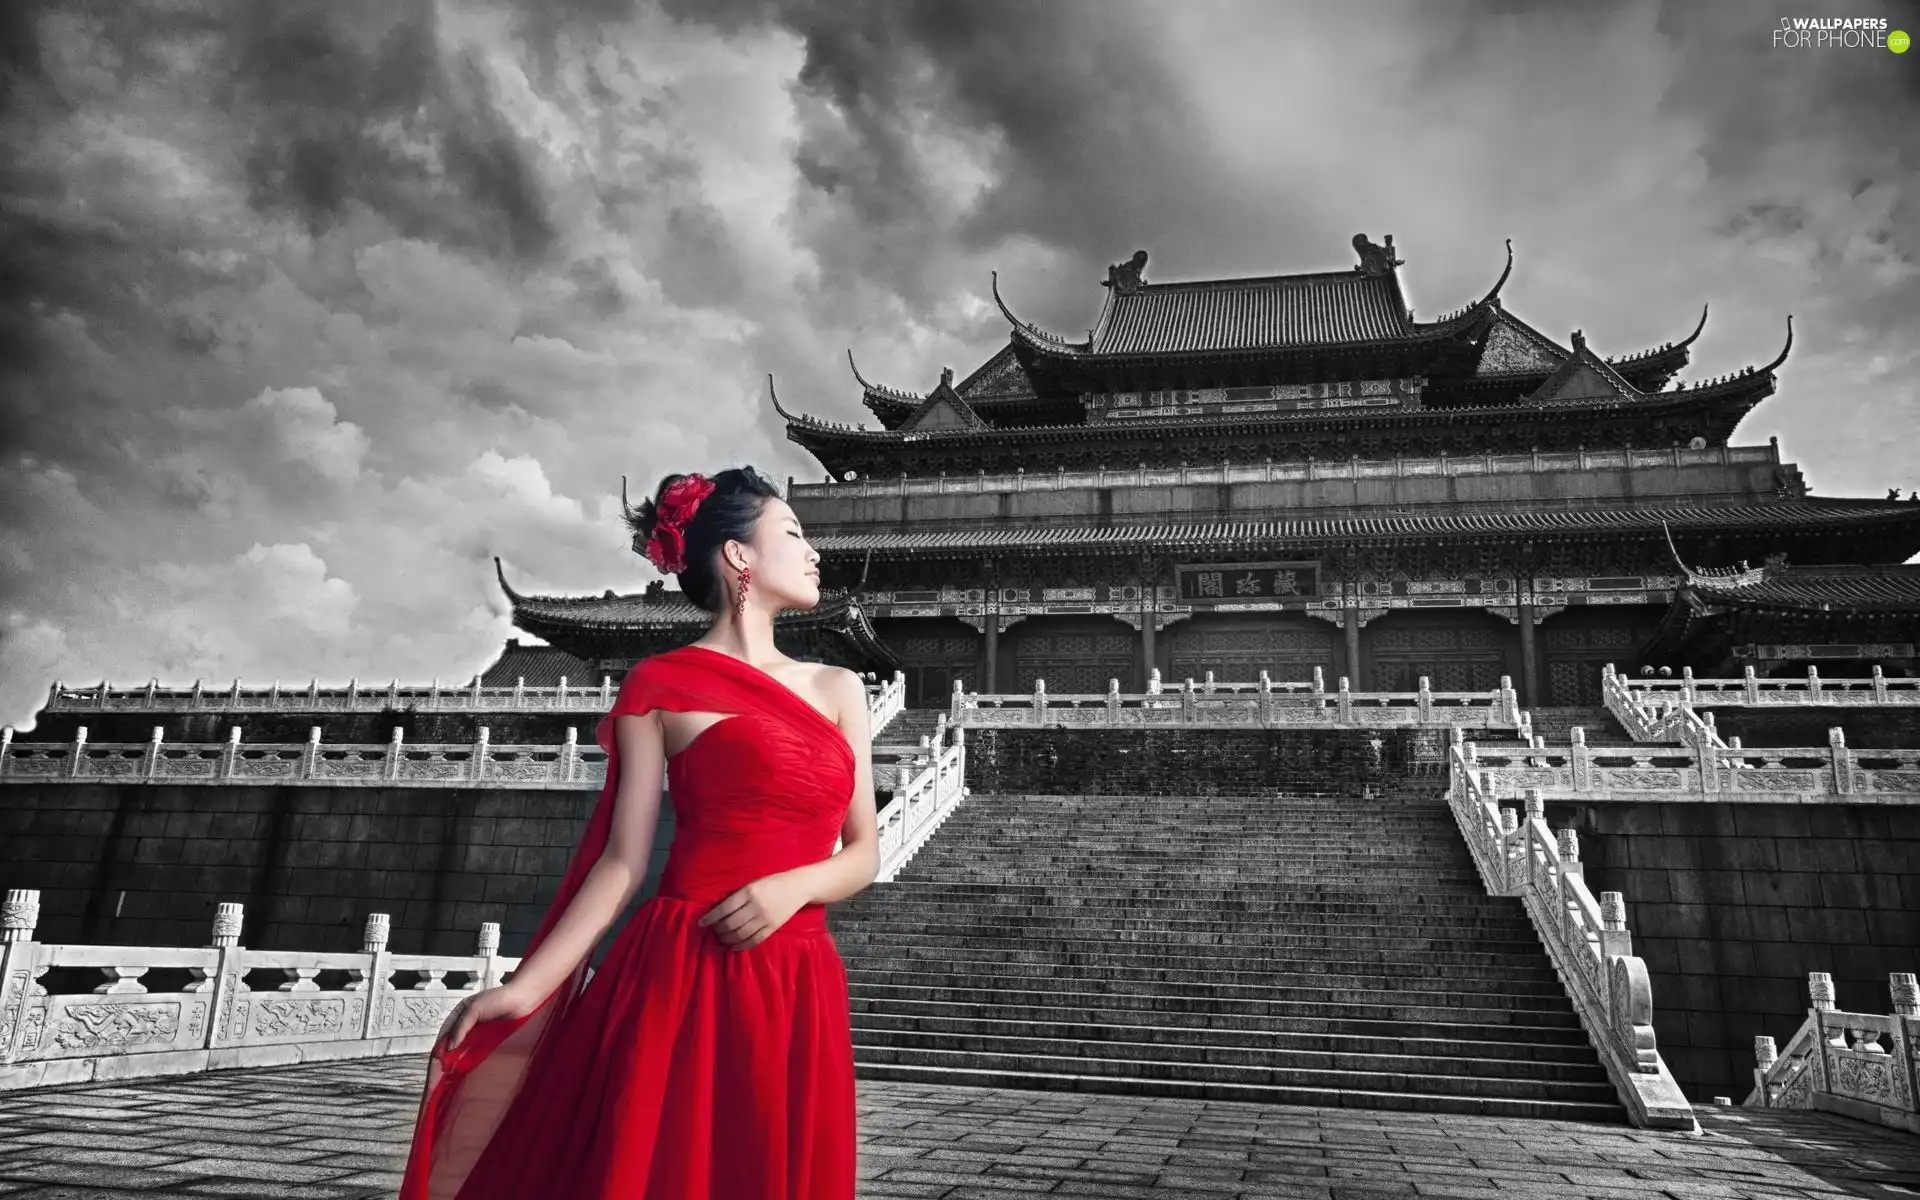 Chinese, architecture, Dress, China, red hot, Buldings